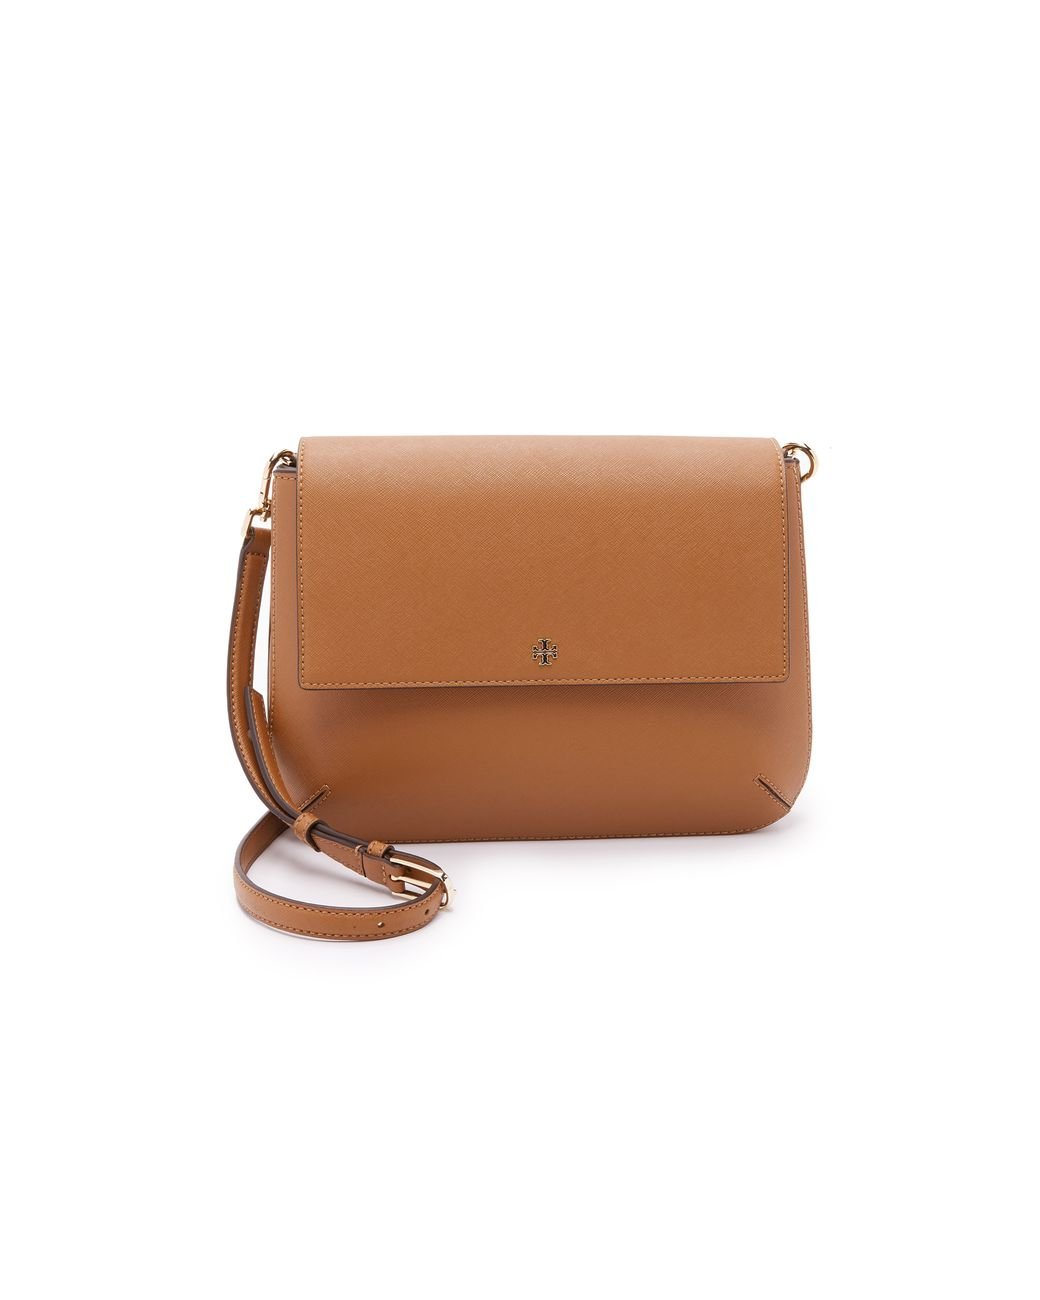 Tory Burch Robinson Messenger Bag in Brown | Lyst